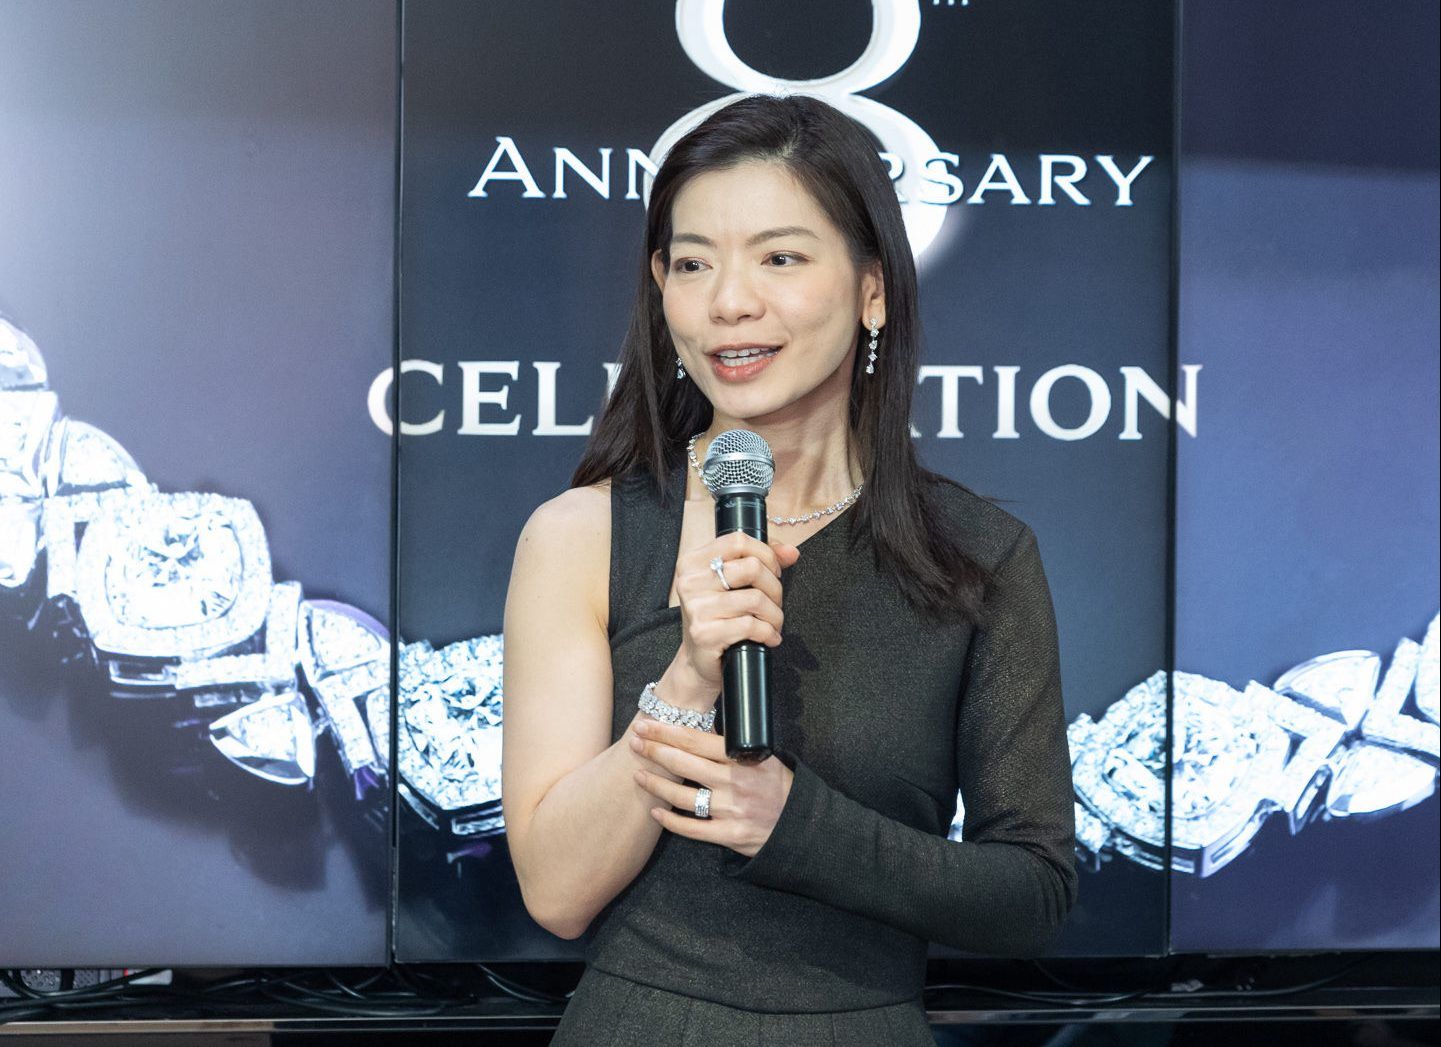 Bling Empire's favourite jewellery brands? Anna Shay loves Boucheron,  Christine Chiu rocks a lot of Louis Vuitton and Kane Lim is obsessed with  Cartier – so who's the flashiest of them all?